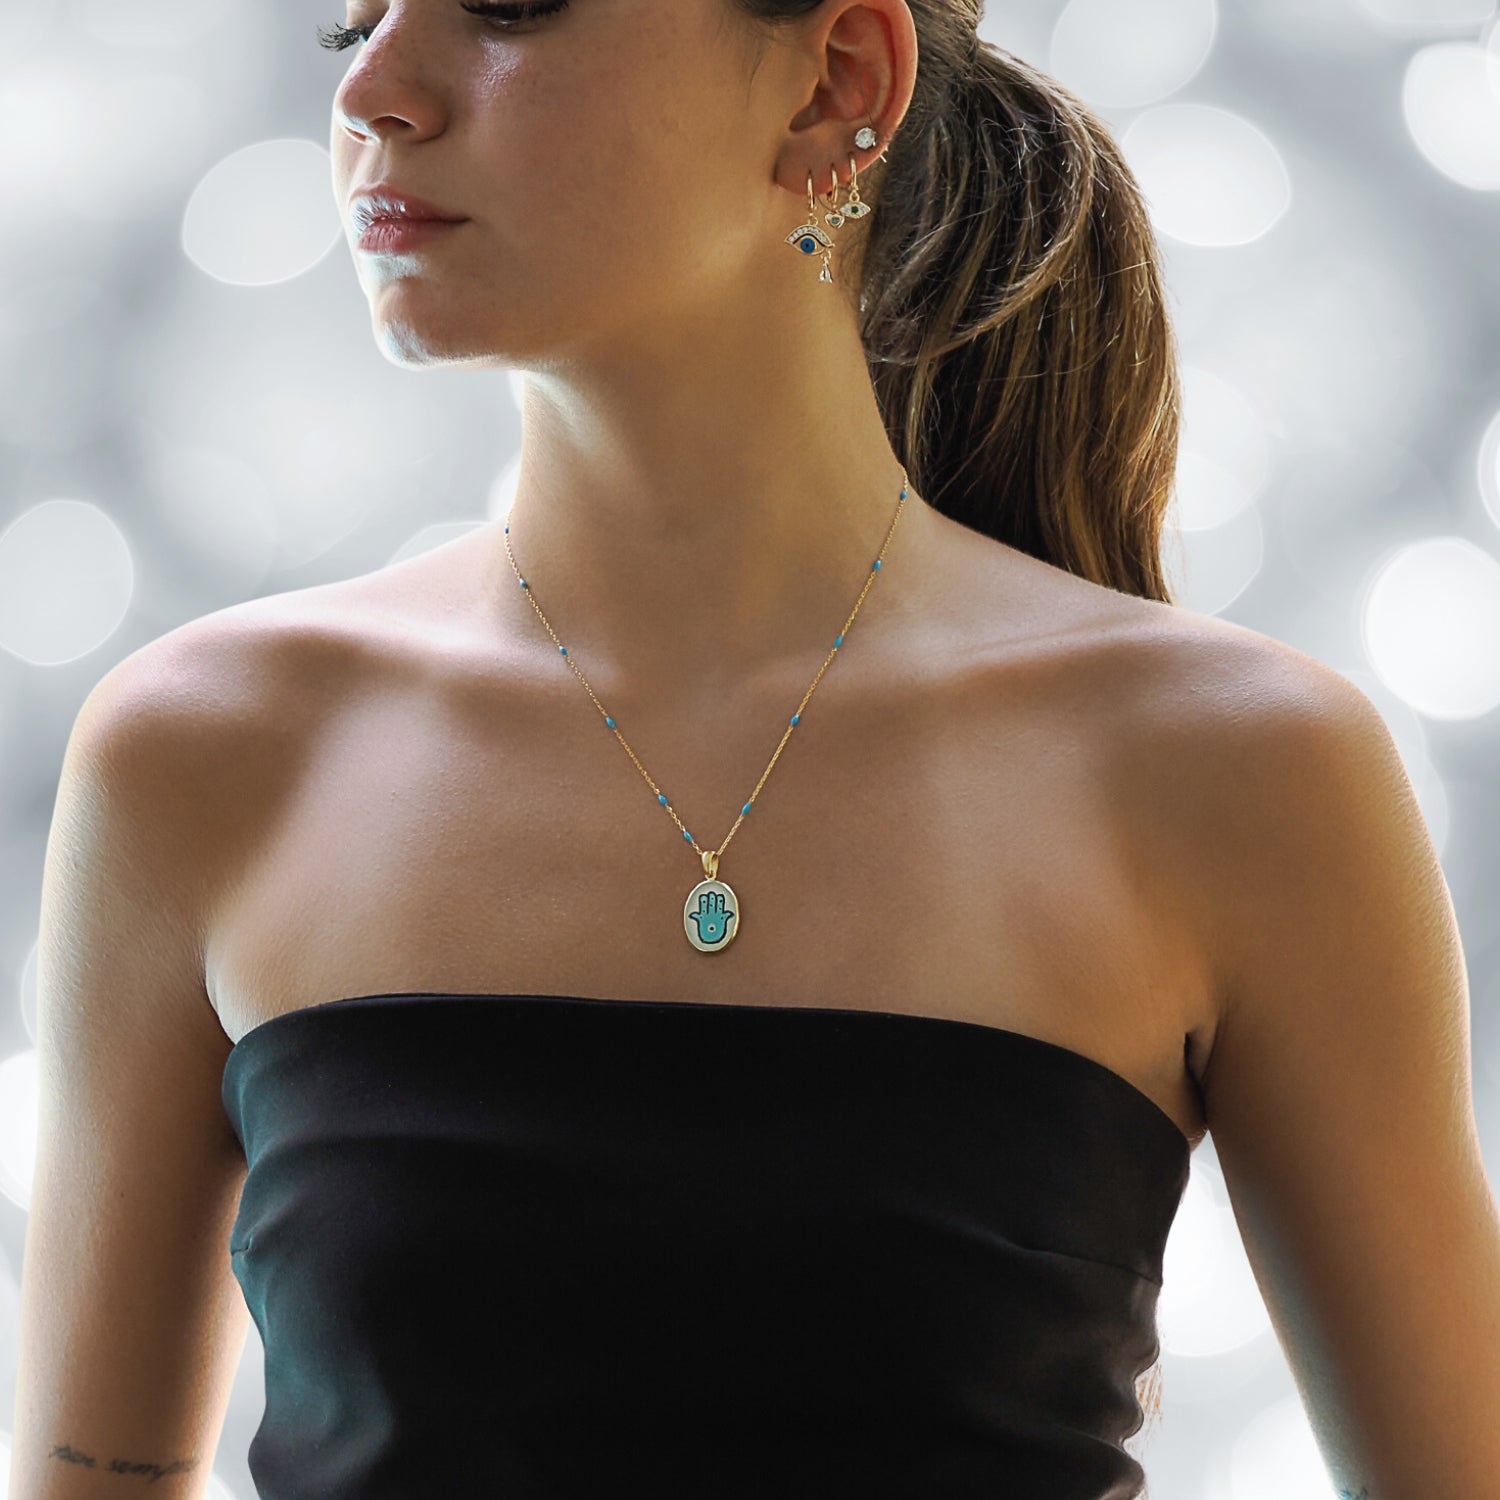 Model Wearing a Sterling Silver and Gold Hamsa Hand Necklace - Embodying Protection and Style.